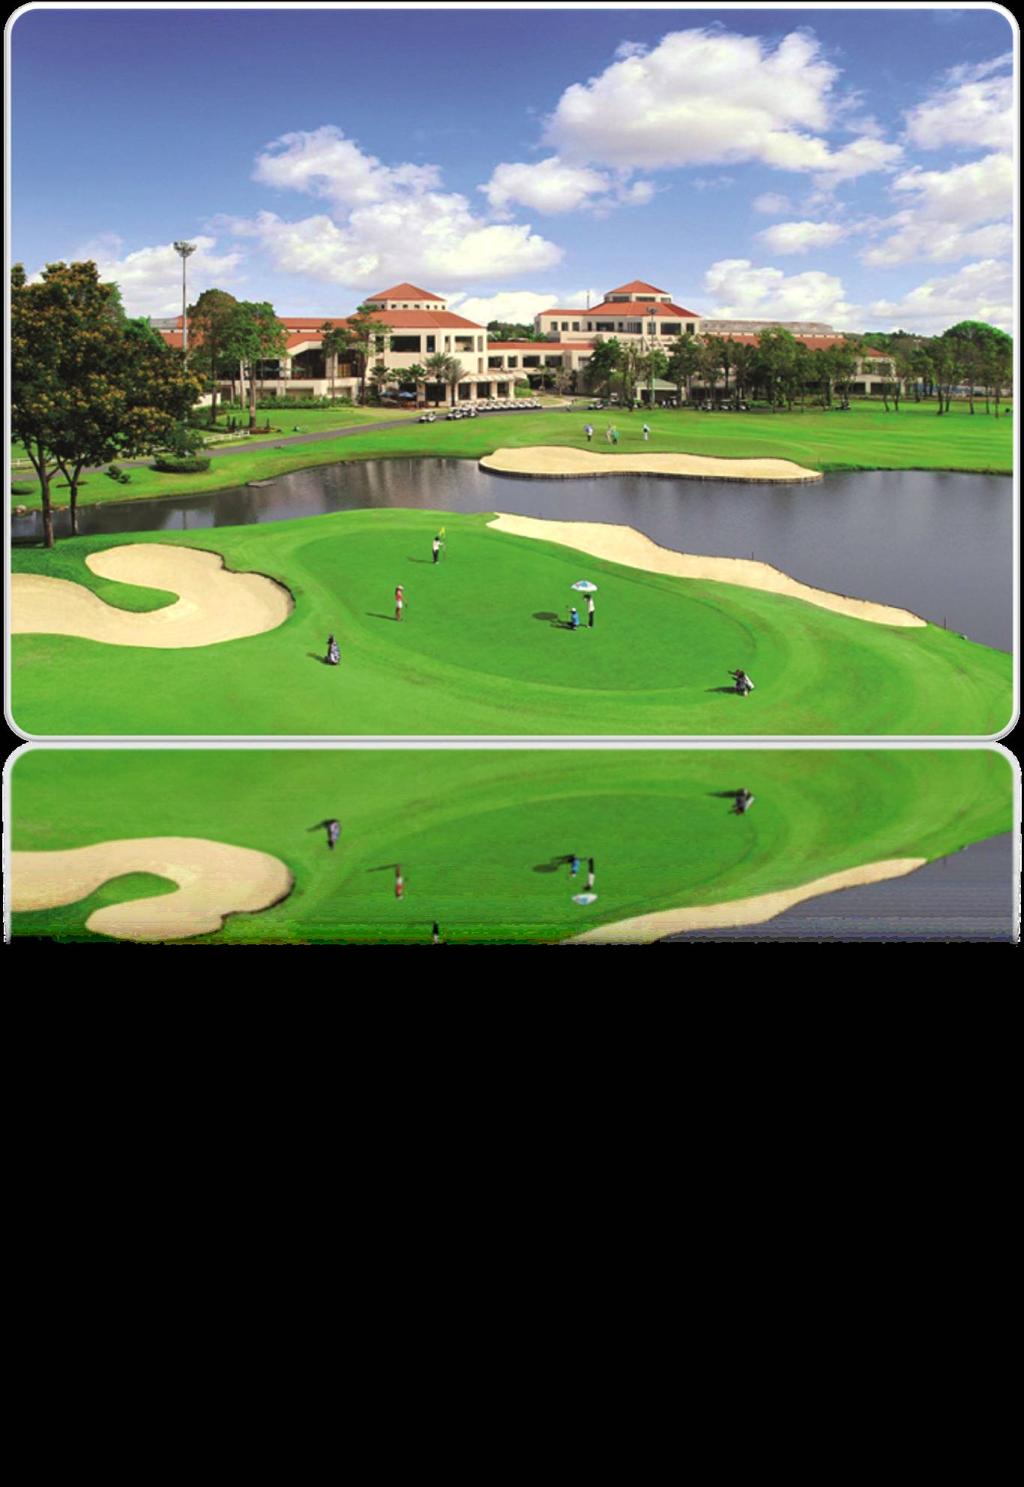 - The First Eastin Golf Resort - Eastin Thana City Golf Resort Bangkok We are delighted to announce a new and exciting direction for the future when the group s first Eastin resort in the region as